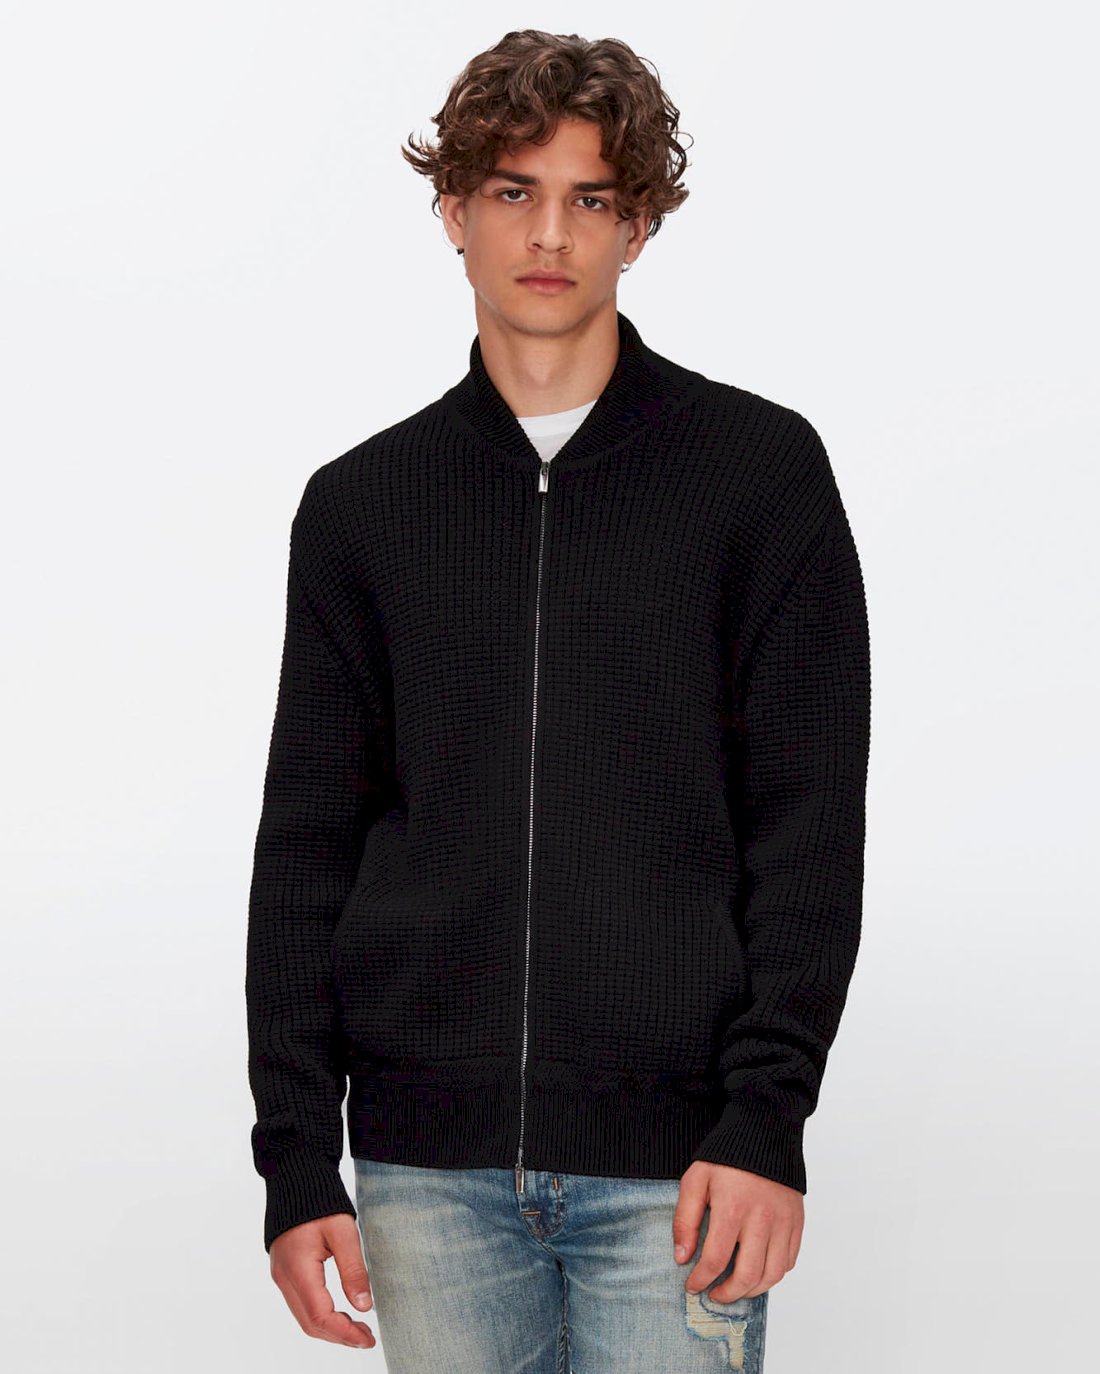 Wool Bomber Jacket in Black | 7 For All Mankind